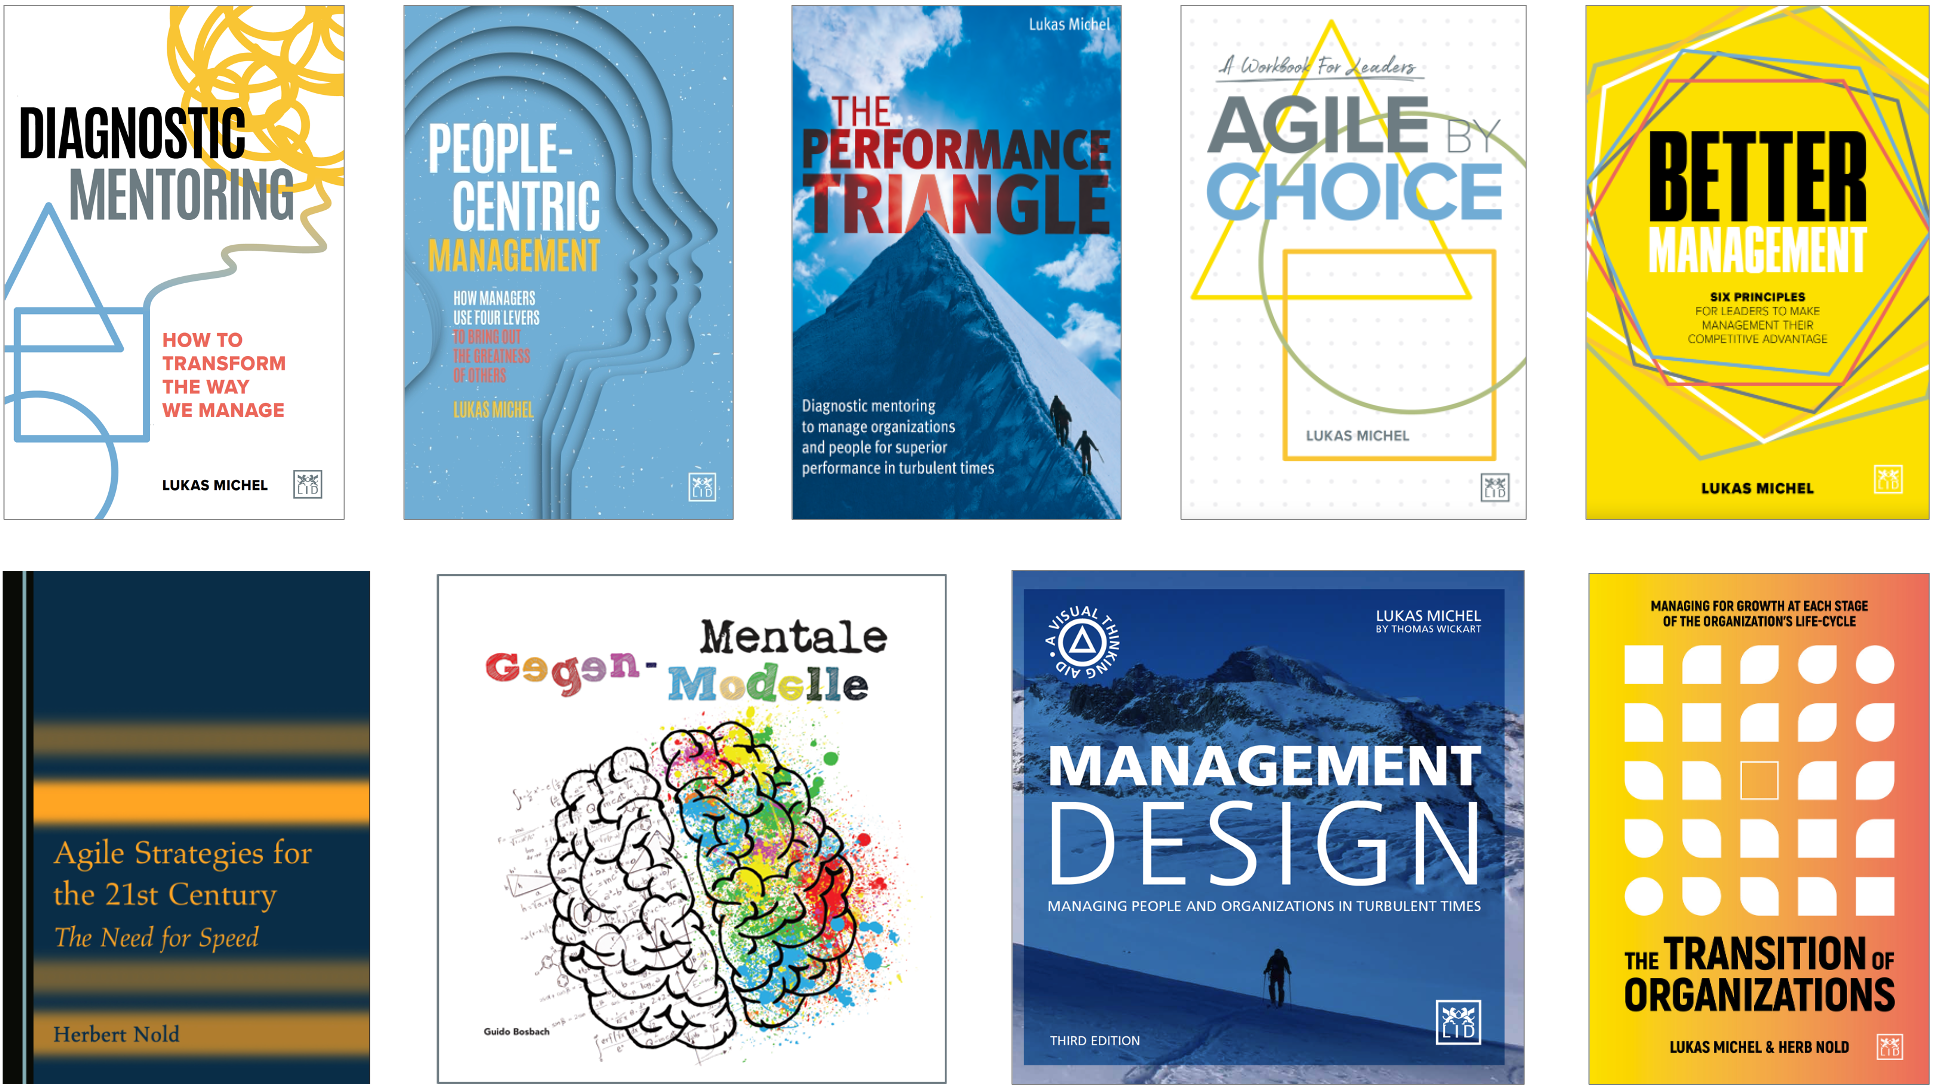 PEOPLE-CENTRIC MANAGEMENT